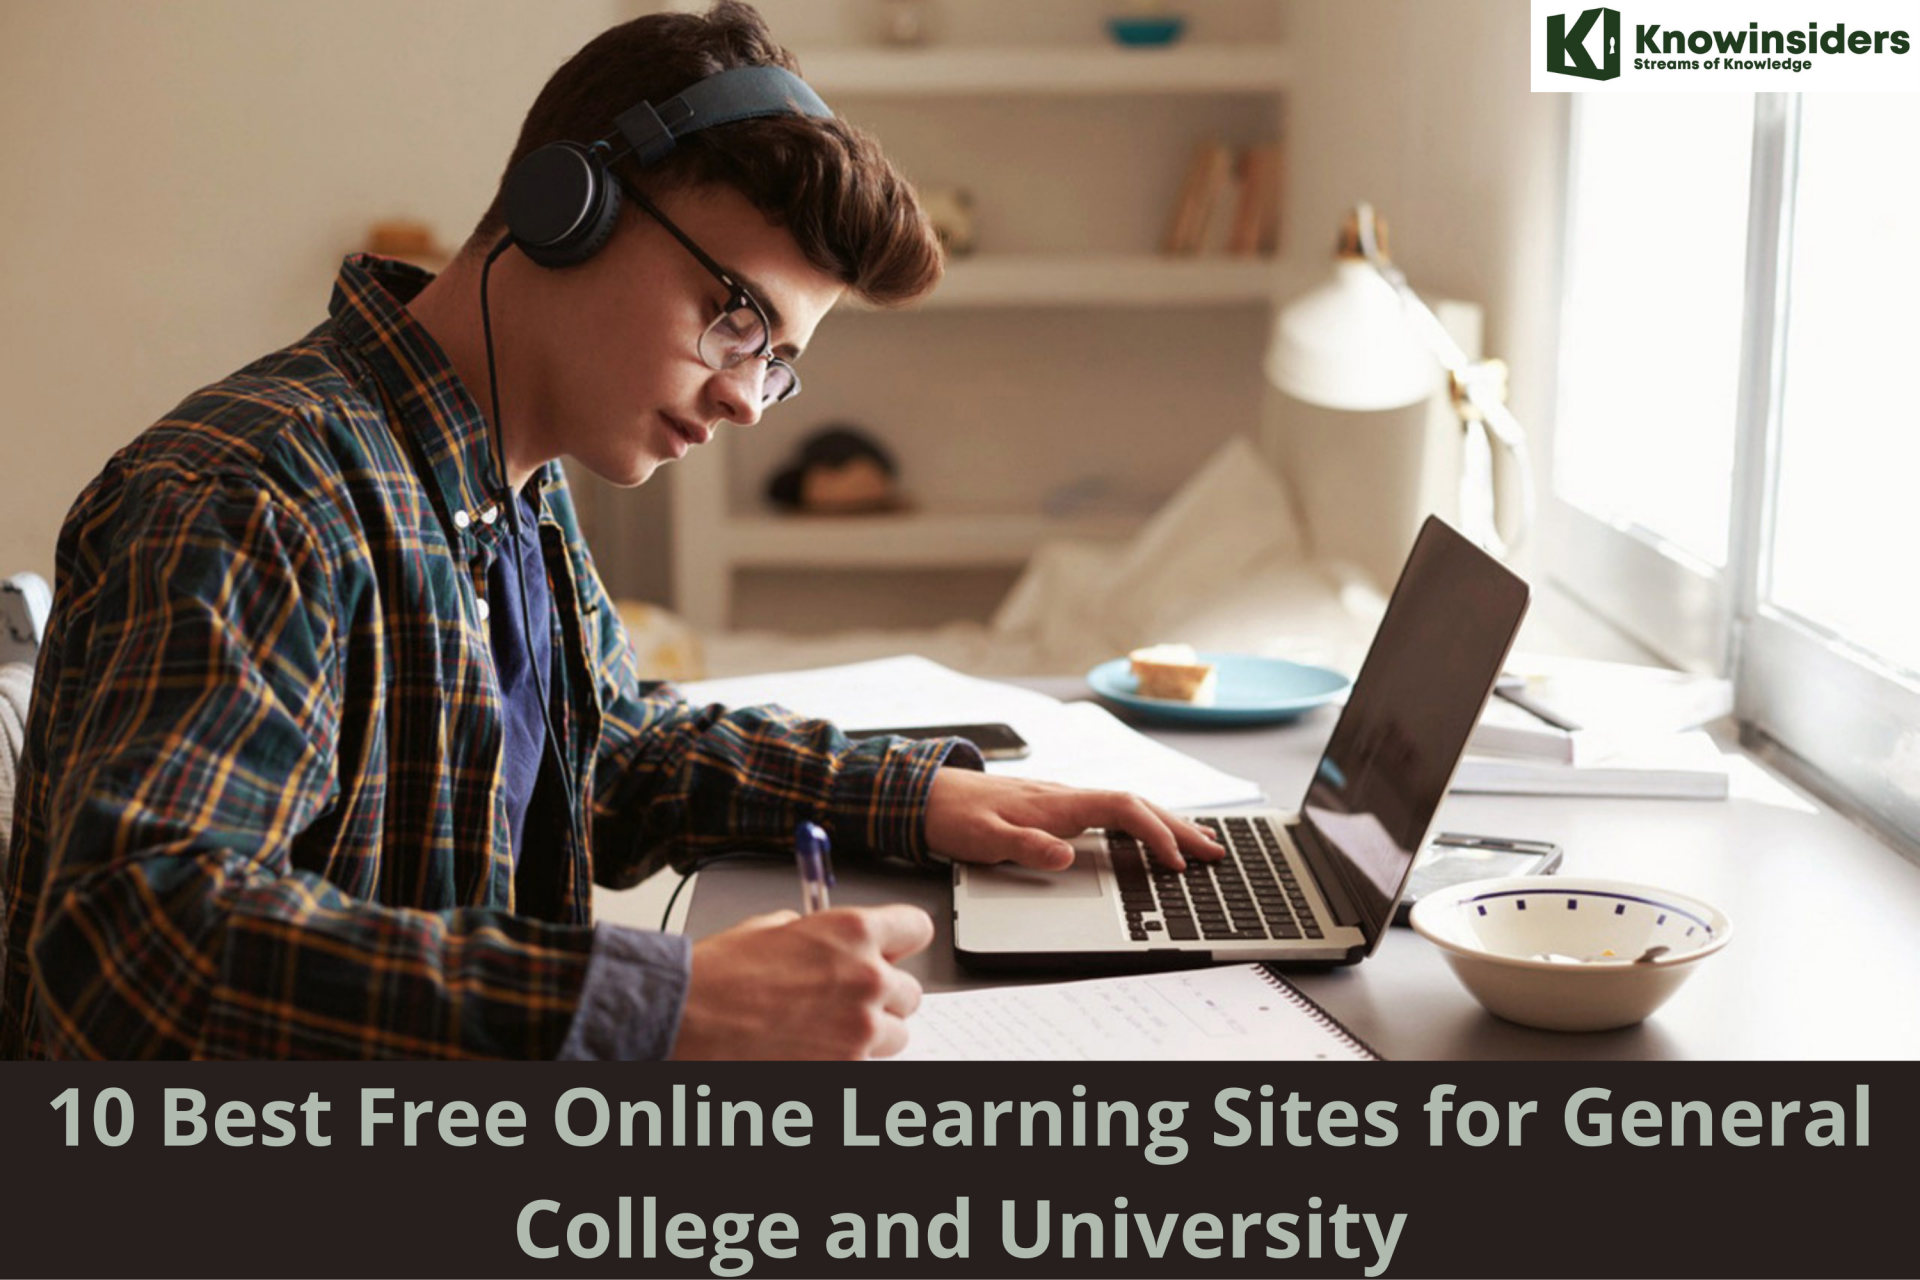 10 Best Free Online Learning Sites for General College and University